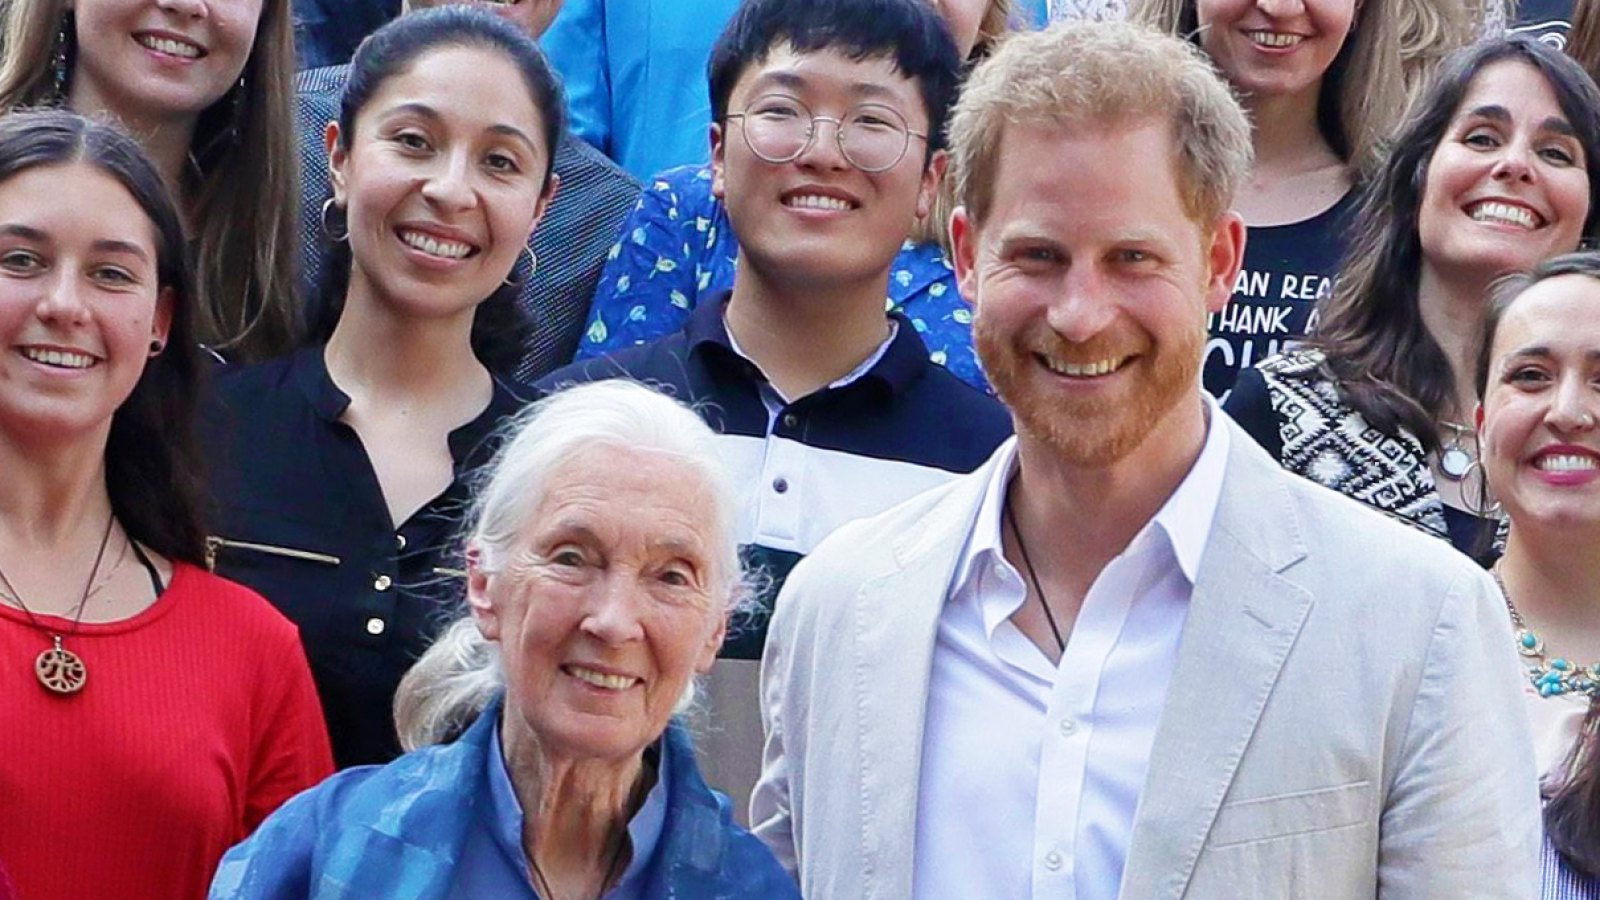 Prince Harry Hinted at Royal Exit to Jane Goodall When She Met Archie 8 Months Earlier